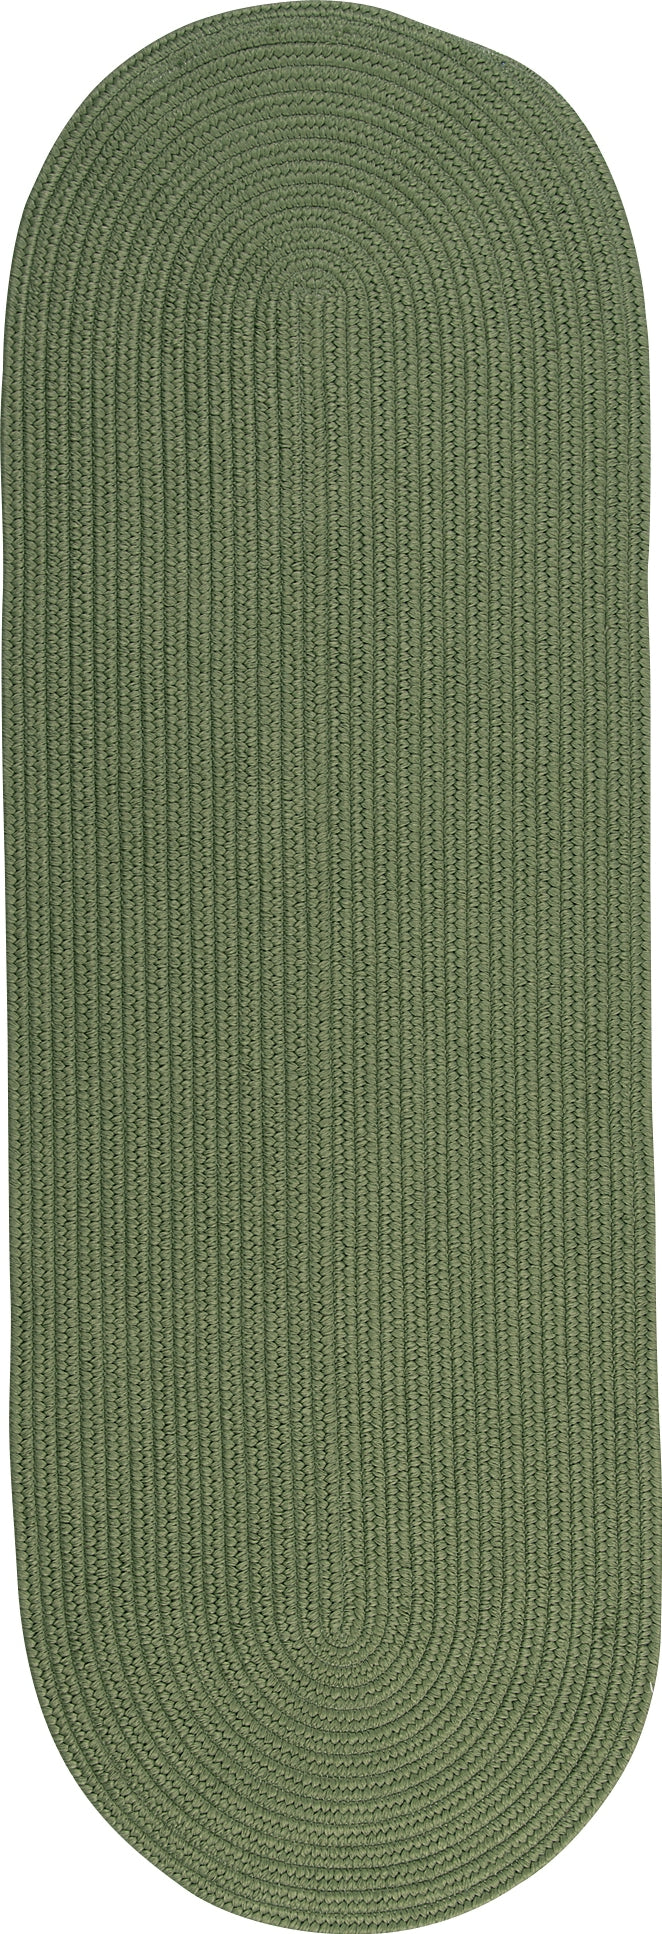 Colonial Mills Reversible Flat-Braid (Oval) Runner RV69 Moss Green Area Rug